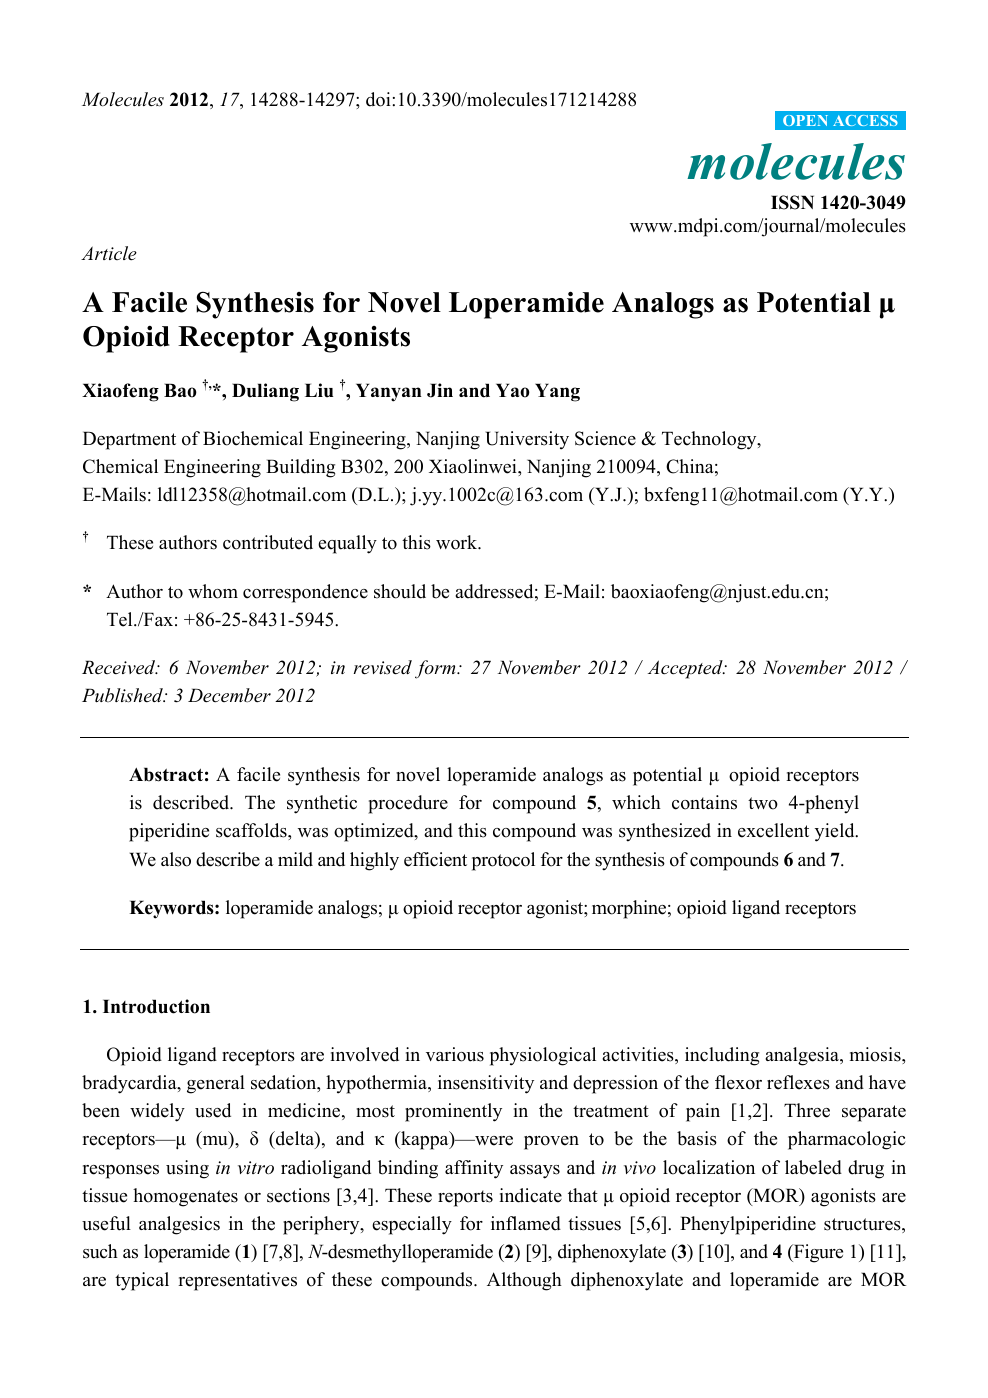 A Facile Synthesis For Novel Loperamide Analogs As Potential M Opioid Receptor Agonists Topic Of Research Paper In Chemical Sciences Download Scholarly Article Pdf And Read For Free On Cyberleninka Open